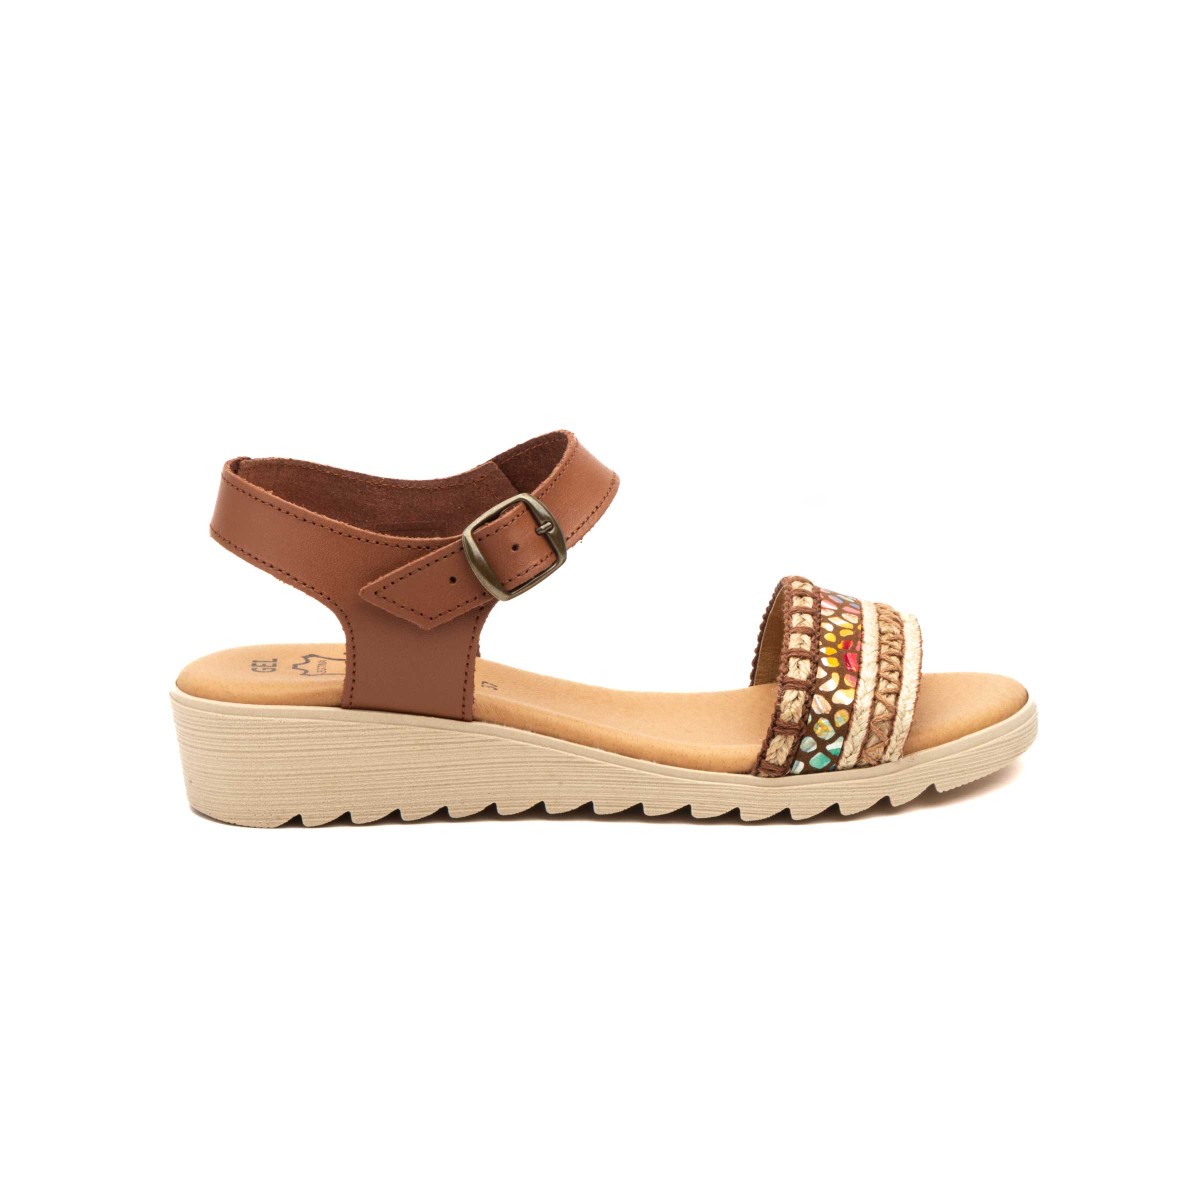 Brown Leather Sandals by CBP